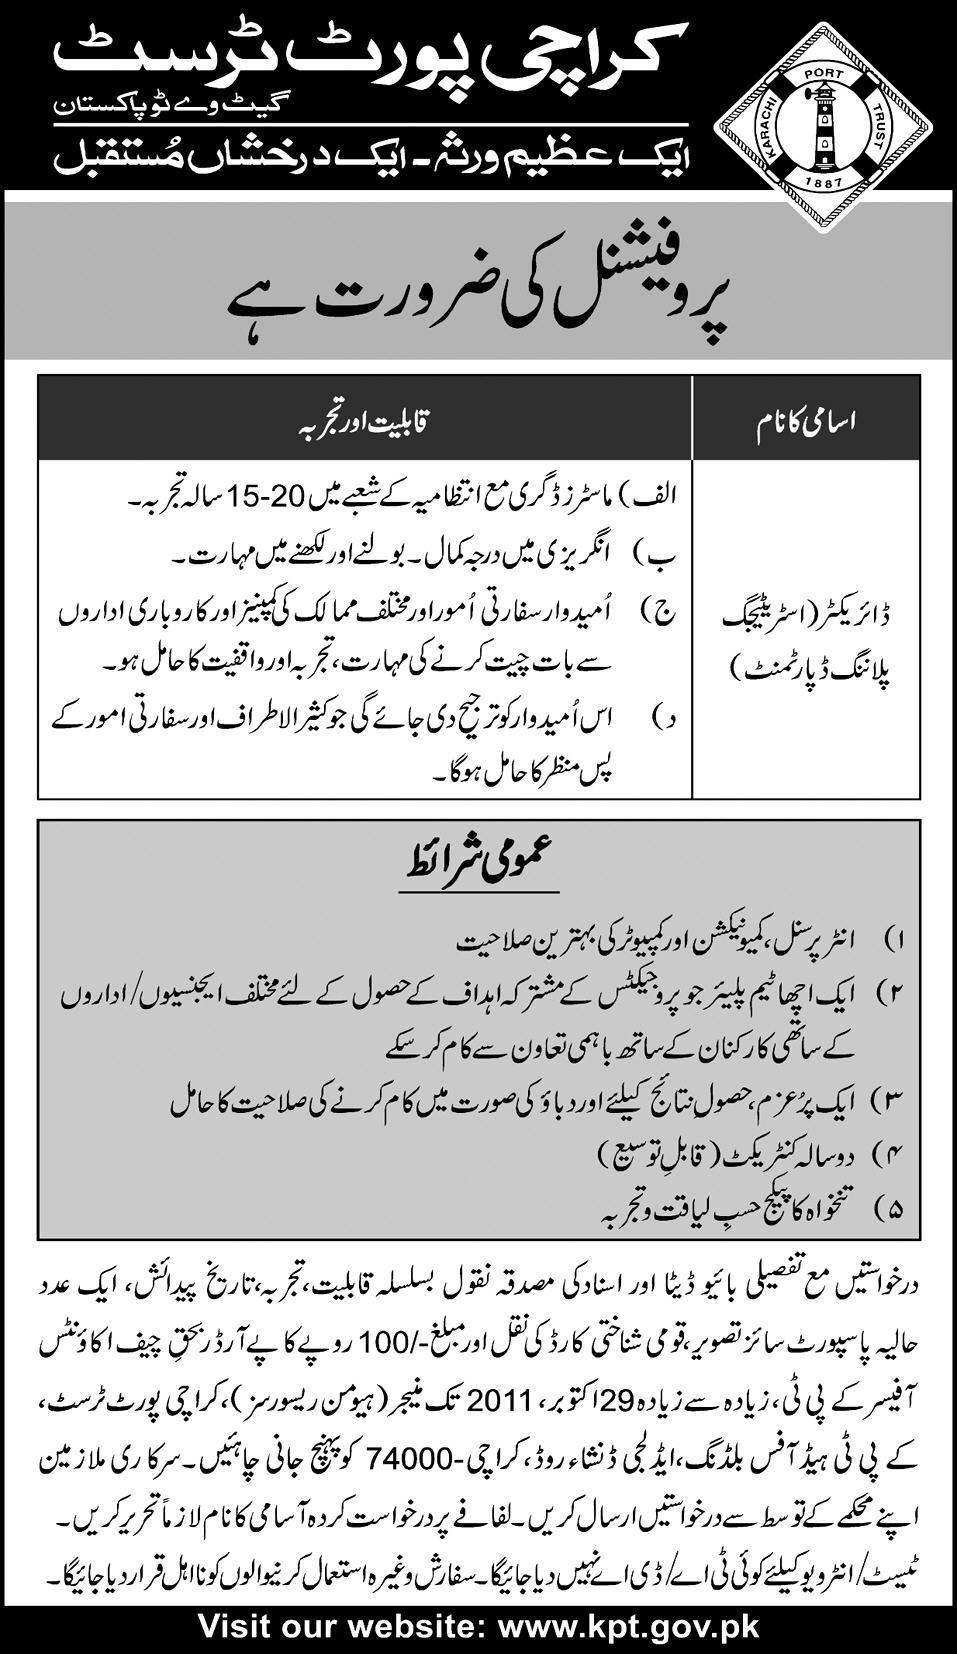 Karachi Port Trust Required the Services of Deputy Director (Strategic Planning Department)